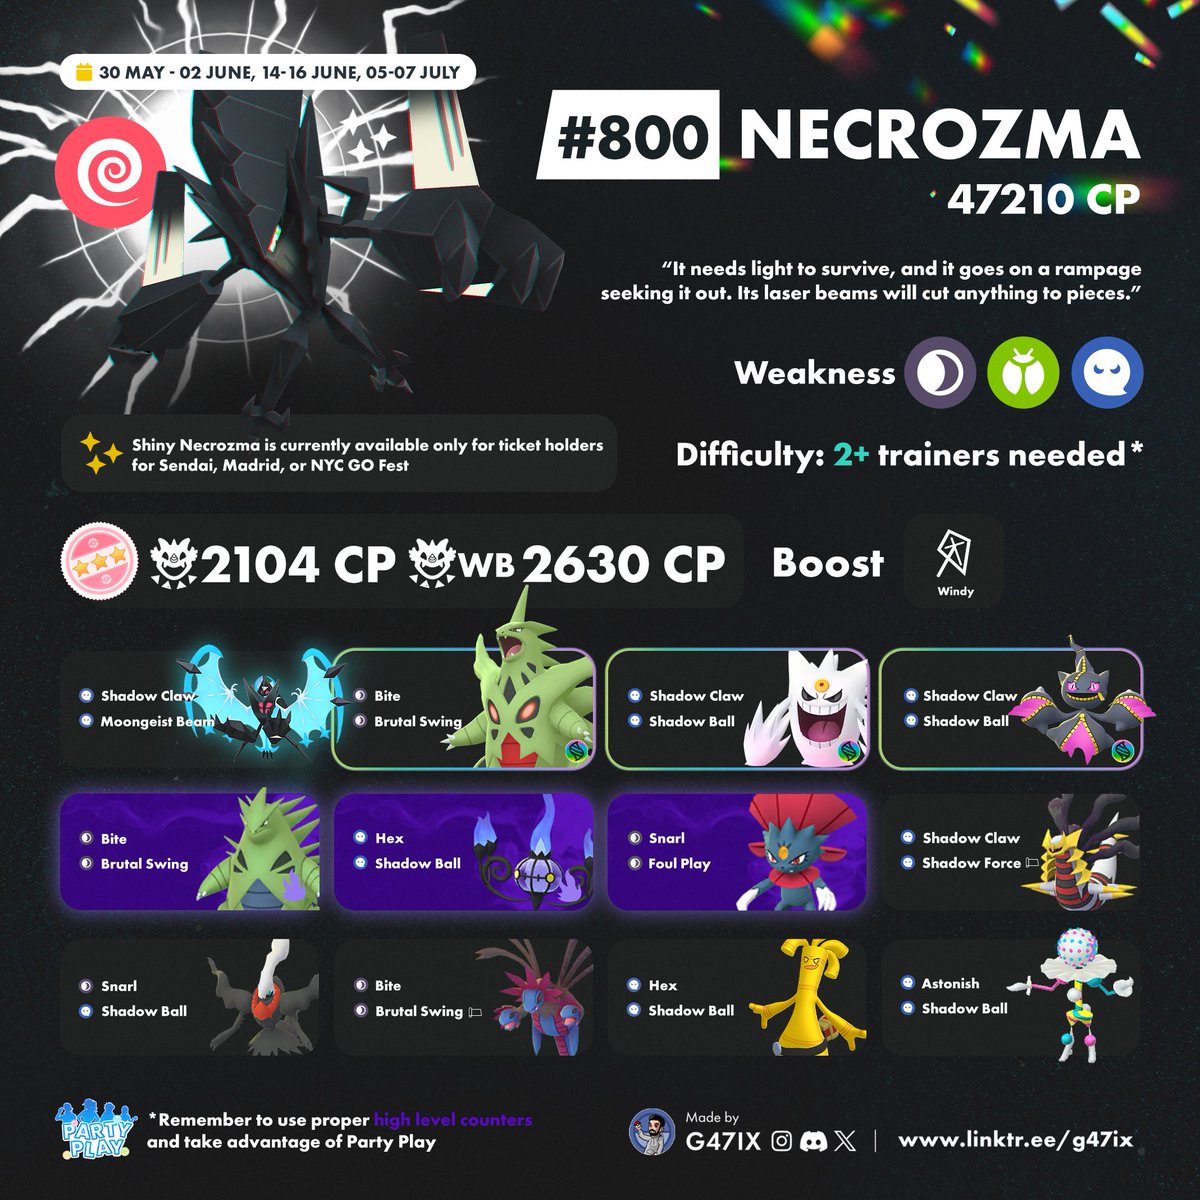 Necrozma is appearing at Sendai GO Fest! 🇯🇵 
Next, it will be available in 🇪🇸 Madrid and 🇺🇸 New York.

🎟️Shiny Necrozma currently is exclusive to ticket holders for these events. In July it will be available to everyone during global event 🌎

 #PokemonGO #GOFest2024